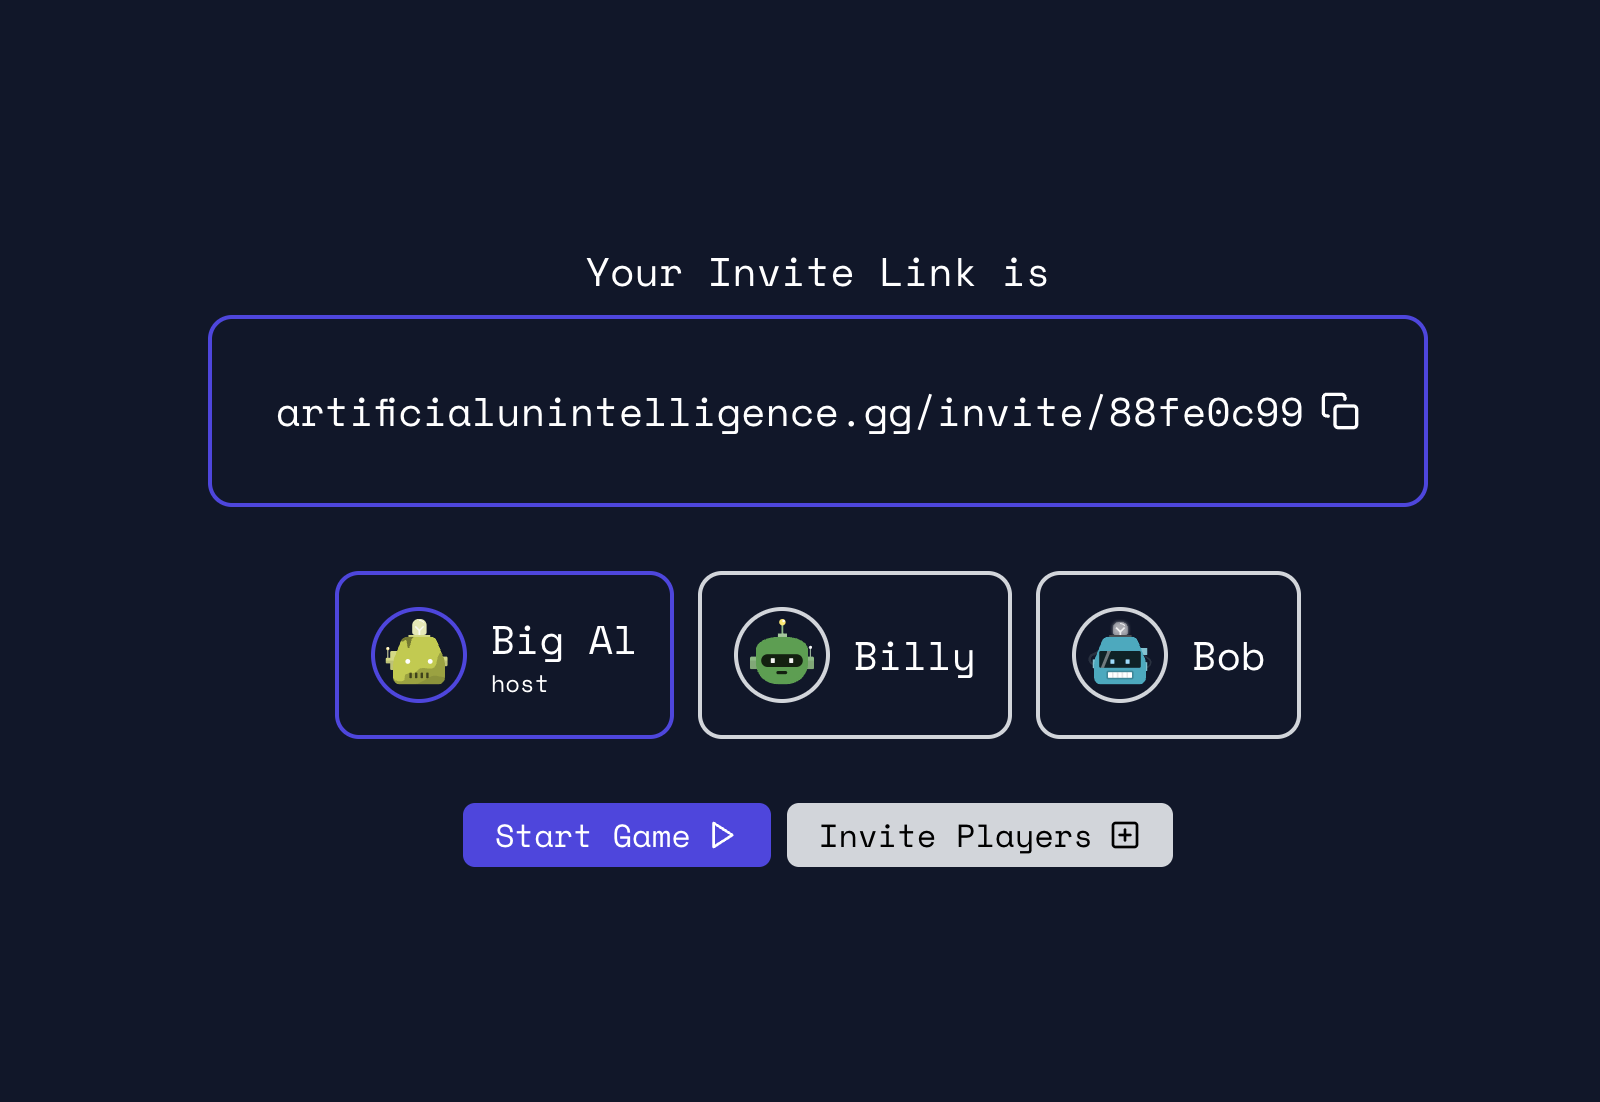 Artificial Unintelligence lobby and invite link